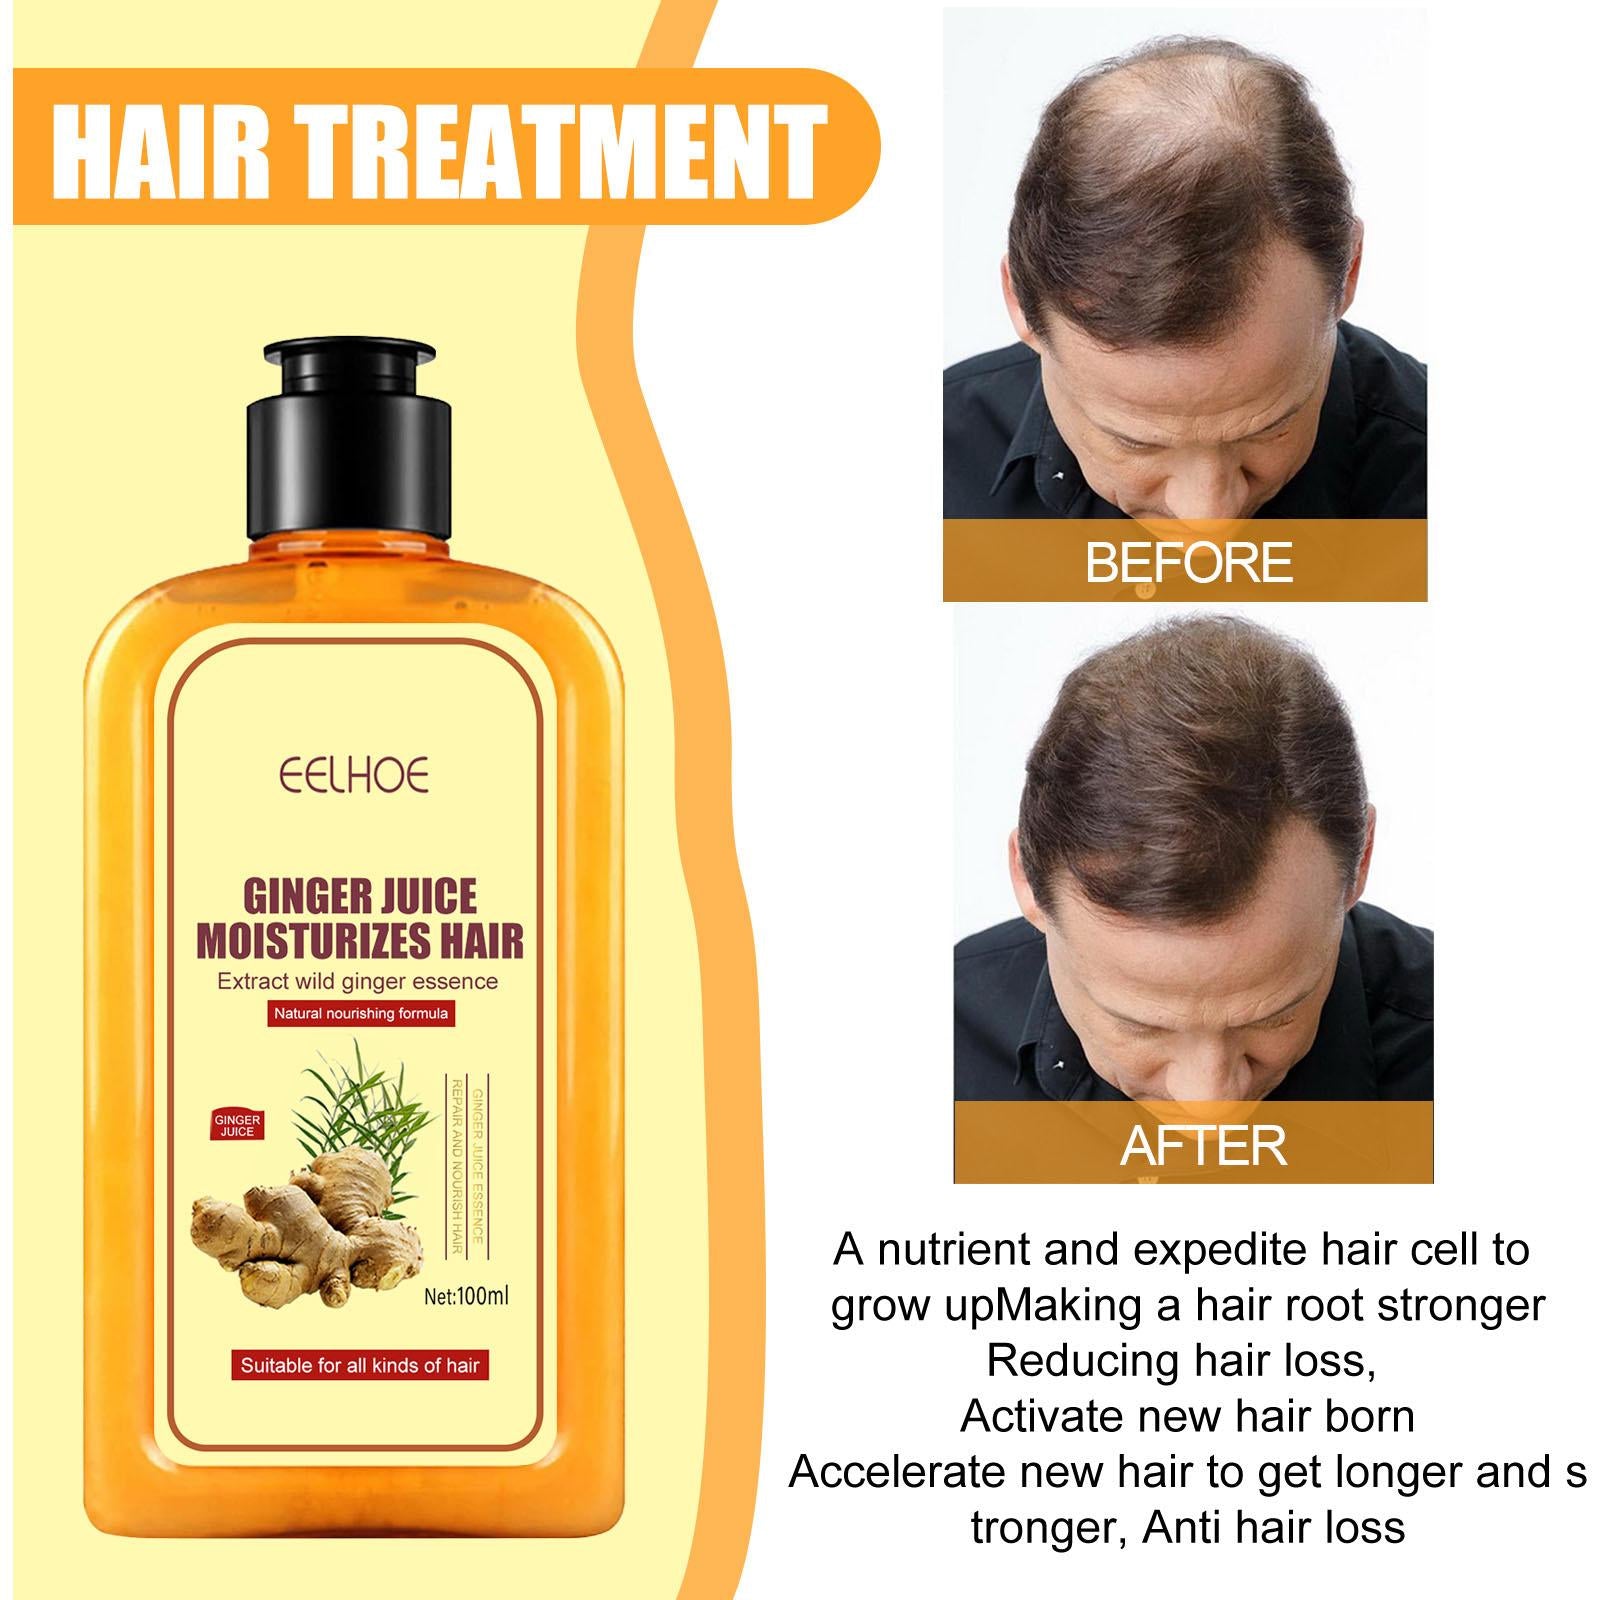 Ginger Instant Hair Regrowth Shampoo